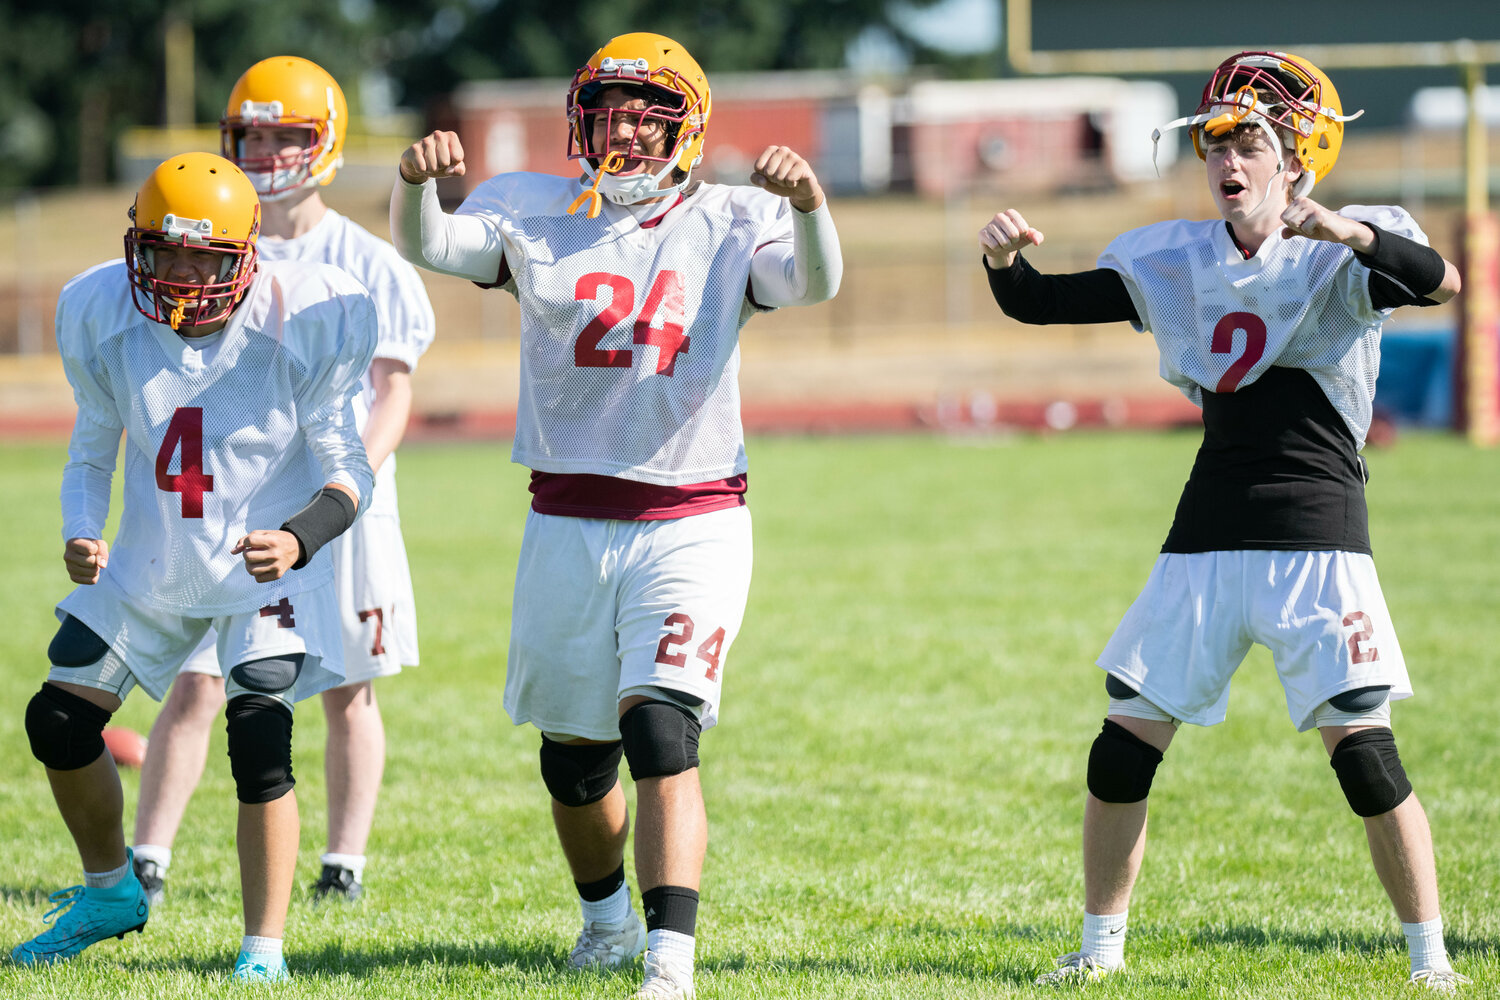 Landen Cline (4), Arean Thapa (24), and Carter Svenson (2) cheer on their teammates during a one-on-one blocking trill at Winlock's practice on Aug. 19